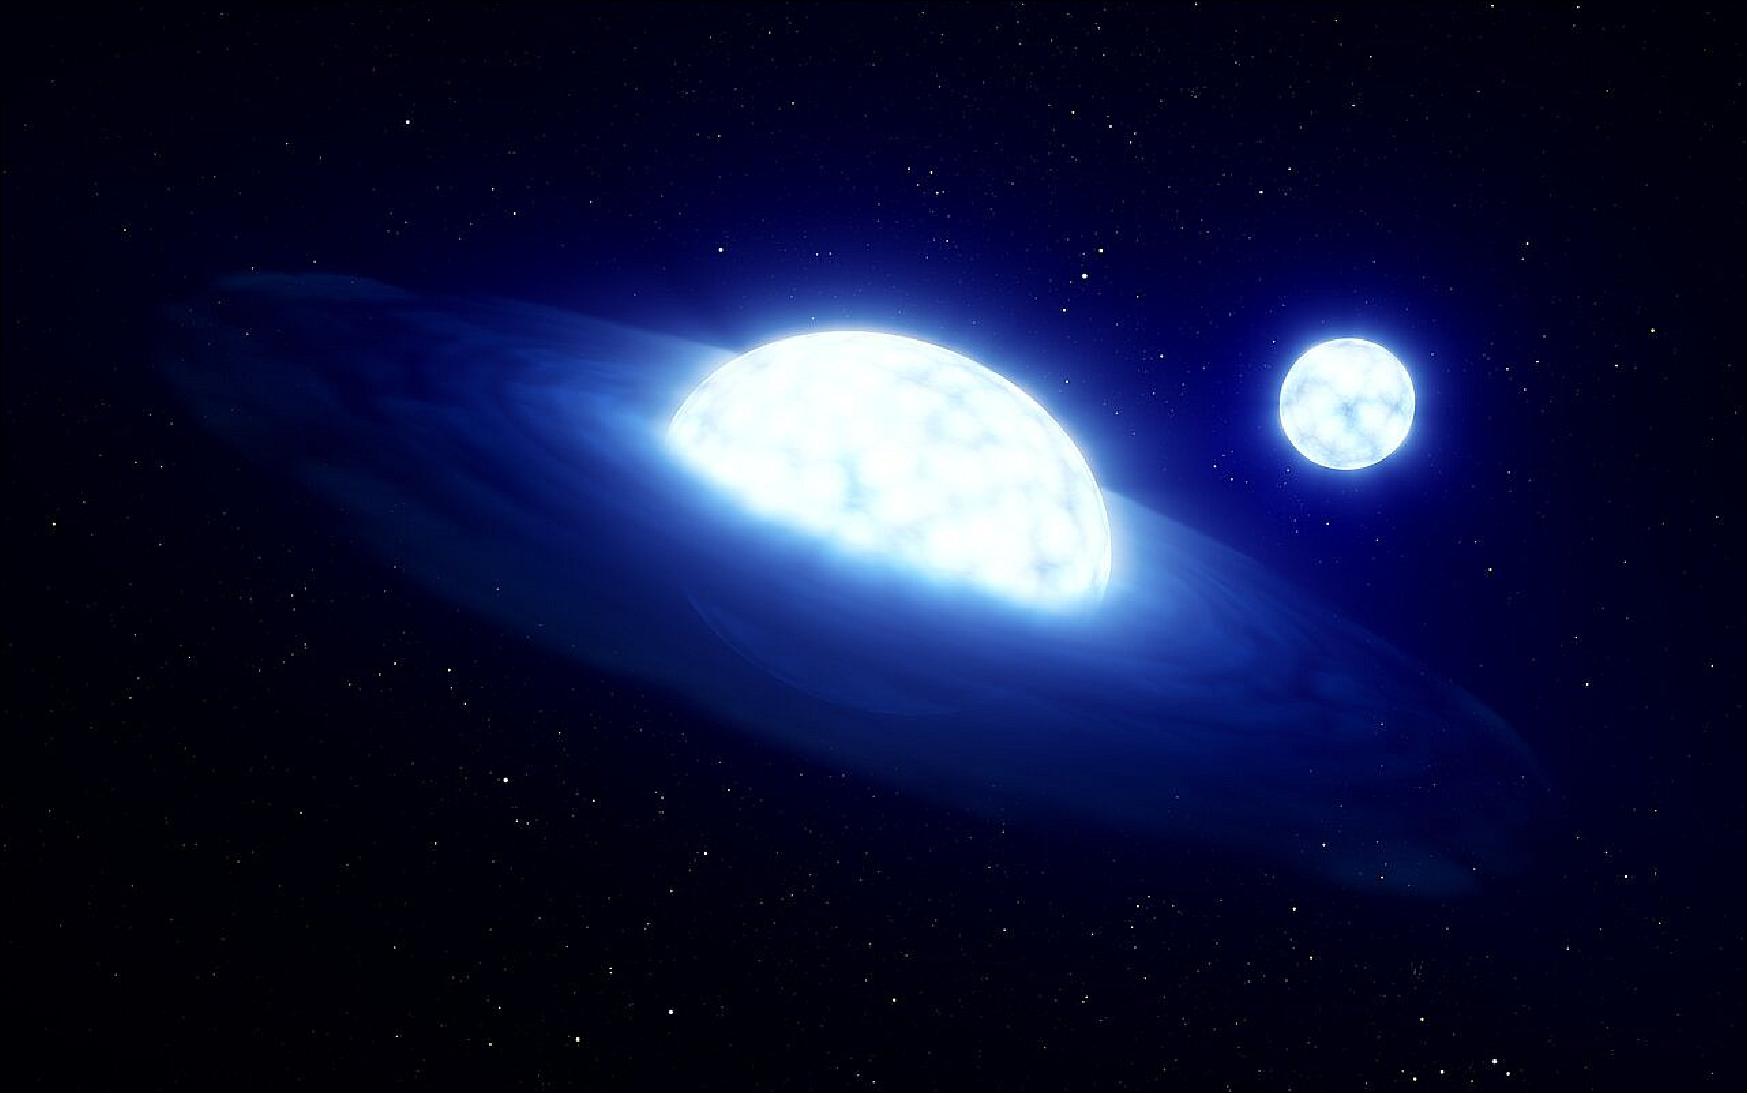 Figure 7: Artist’s impression of HR 6819. New research using data from ESO’s Very Large Telescope and Very Large Telescope Interferometer has revealed that HR 6819, previously believed to be a triple system with a black hole, is in fact a system of two stars with no black hole. The scientists, a KU Leuven-ESO team, believe they have observed this binary system in a brief moment after one of the stars sucked the atmosphere off its companion, a phenomenon often referred to as “stellar vampirism”. This artist’s impression shows what the system might look like; it’s composed of an oblate star with a disc around it (a Be “vampire” star; foreground) and B-type star that has been stripped of its atmosphere (background), image credit: ESO/L. Calçada